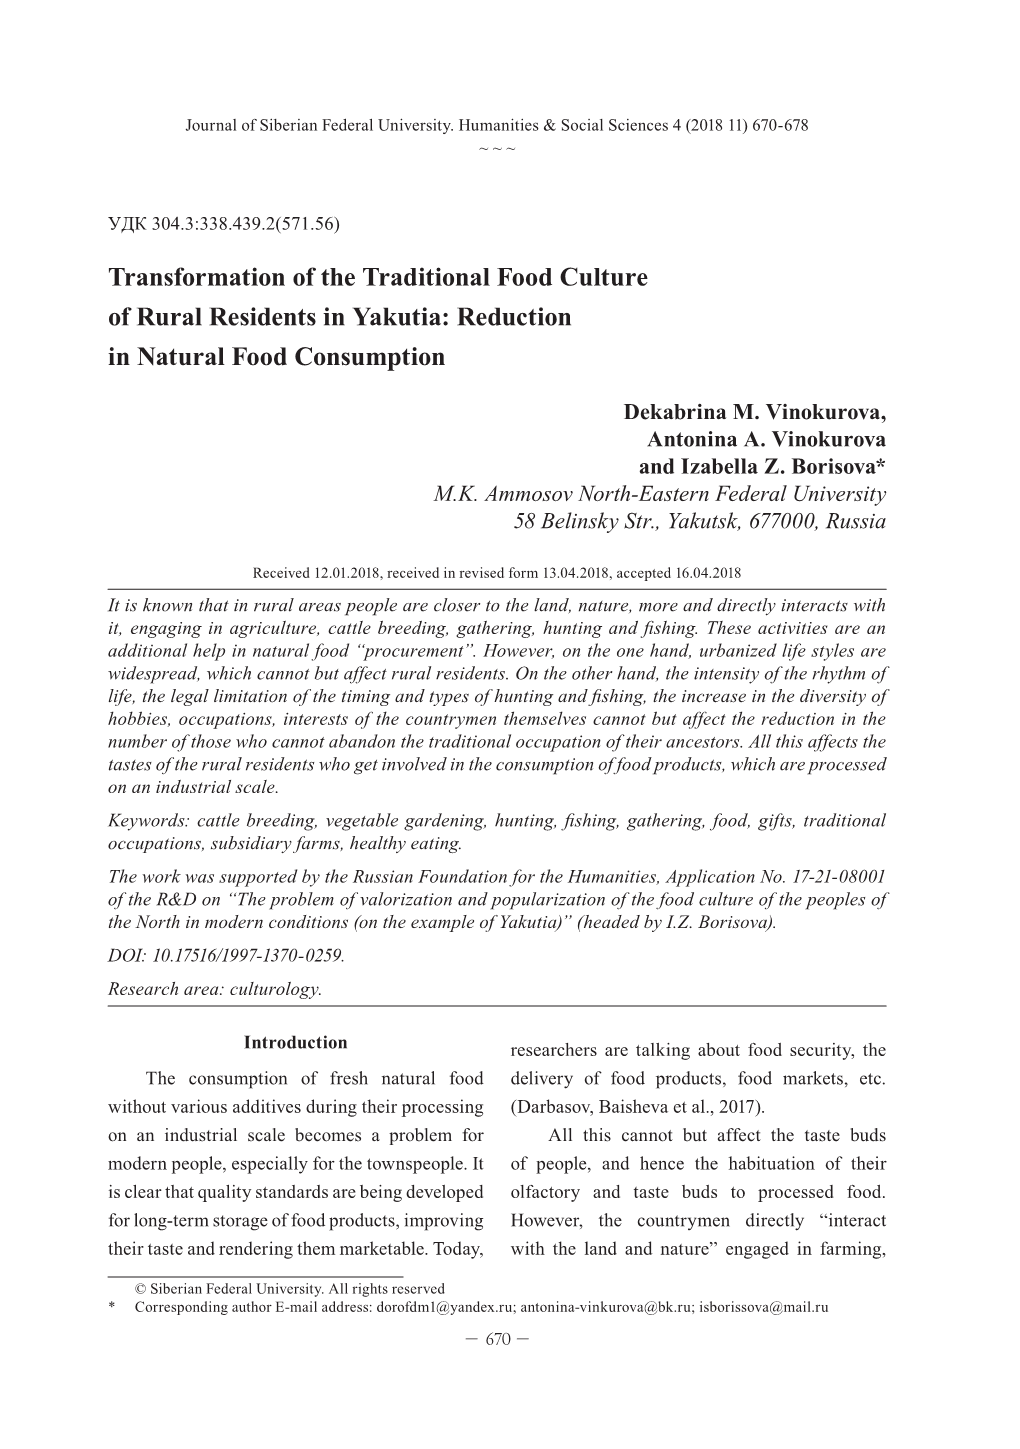 Transformation of the Traditional Food Culture of Rural Residents in Yakutia: Reduction in Natural Food Consumption